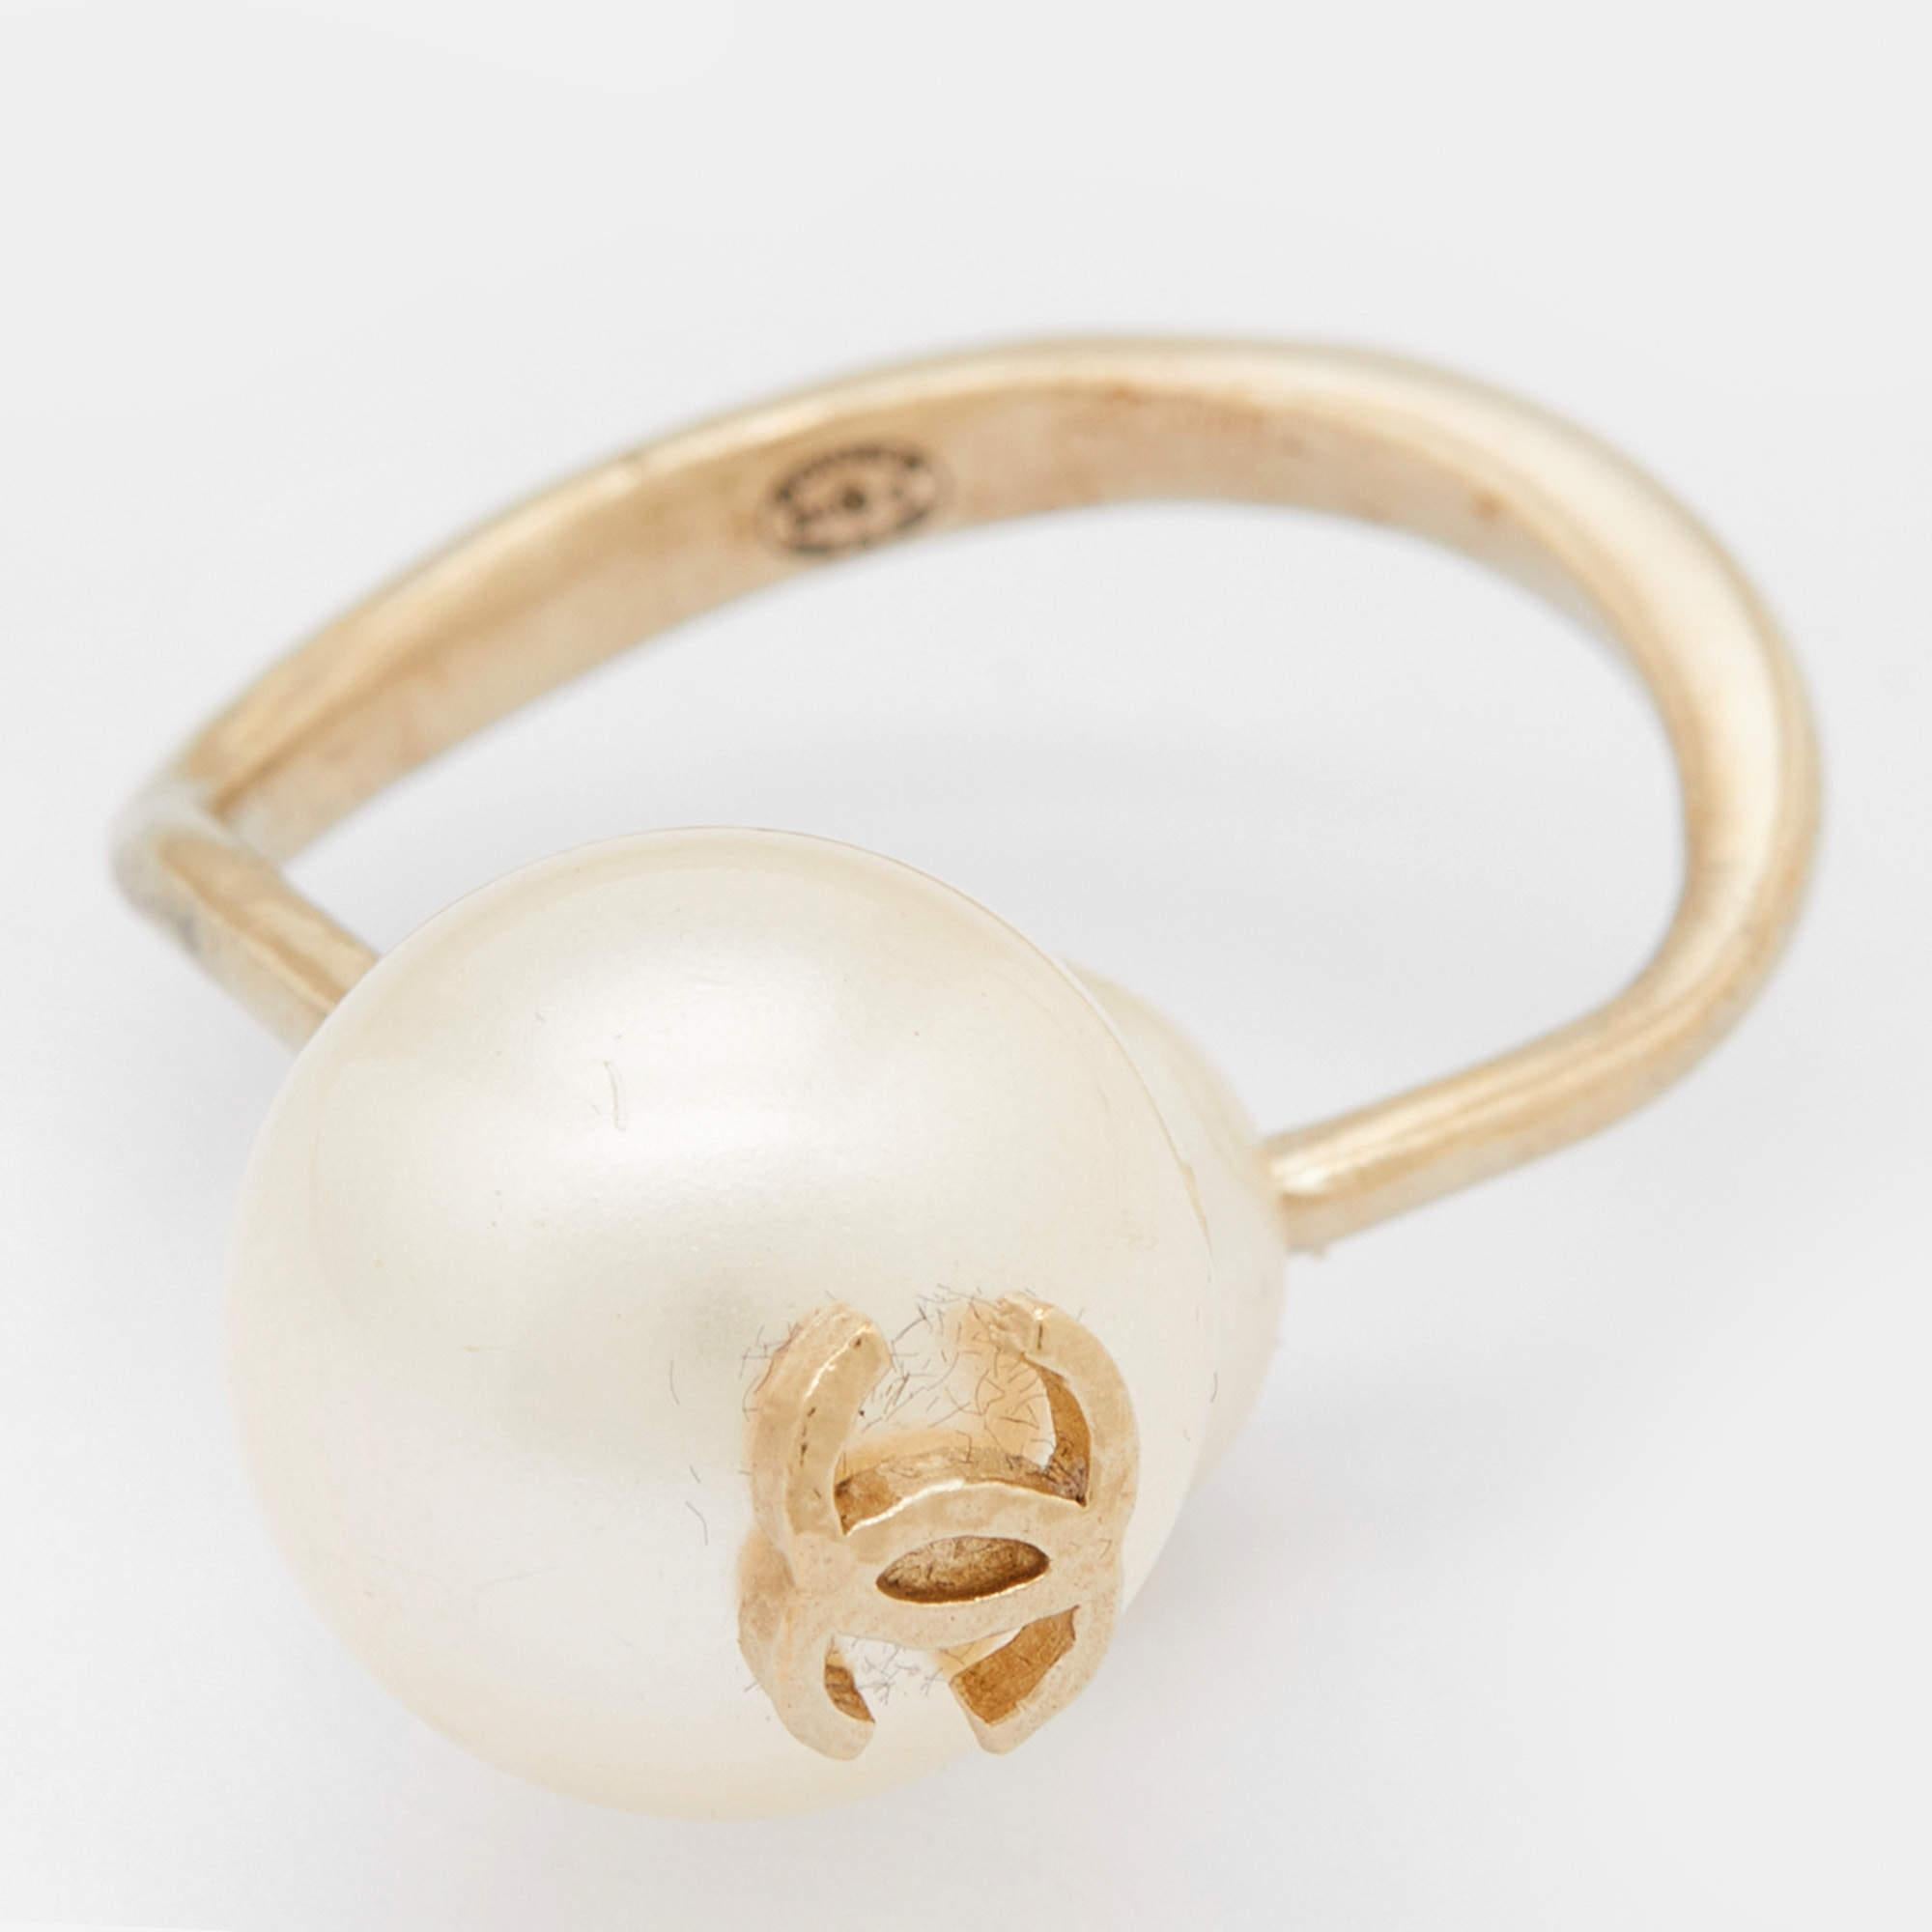 The ever-timeless CC logo remains the highlight of this creation, laid elegantly atop a large faux pearl. This Chanel ring with a bent gold-tone metal band is sure to be a favorite accessory.

